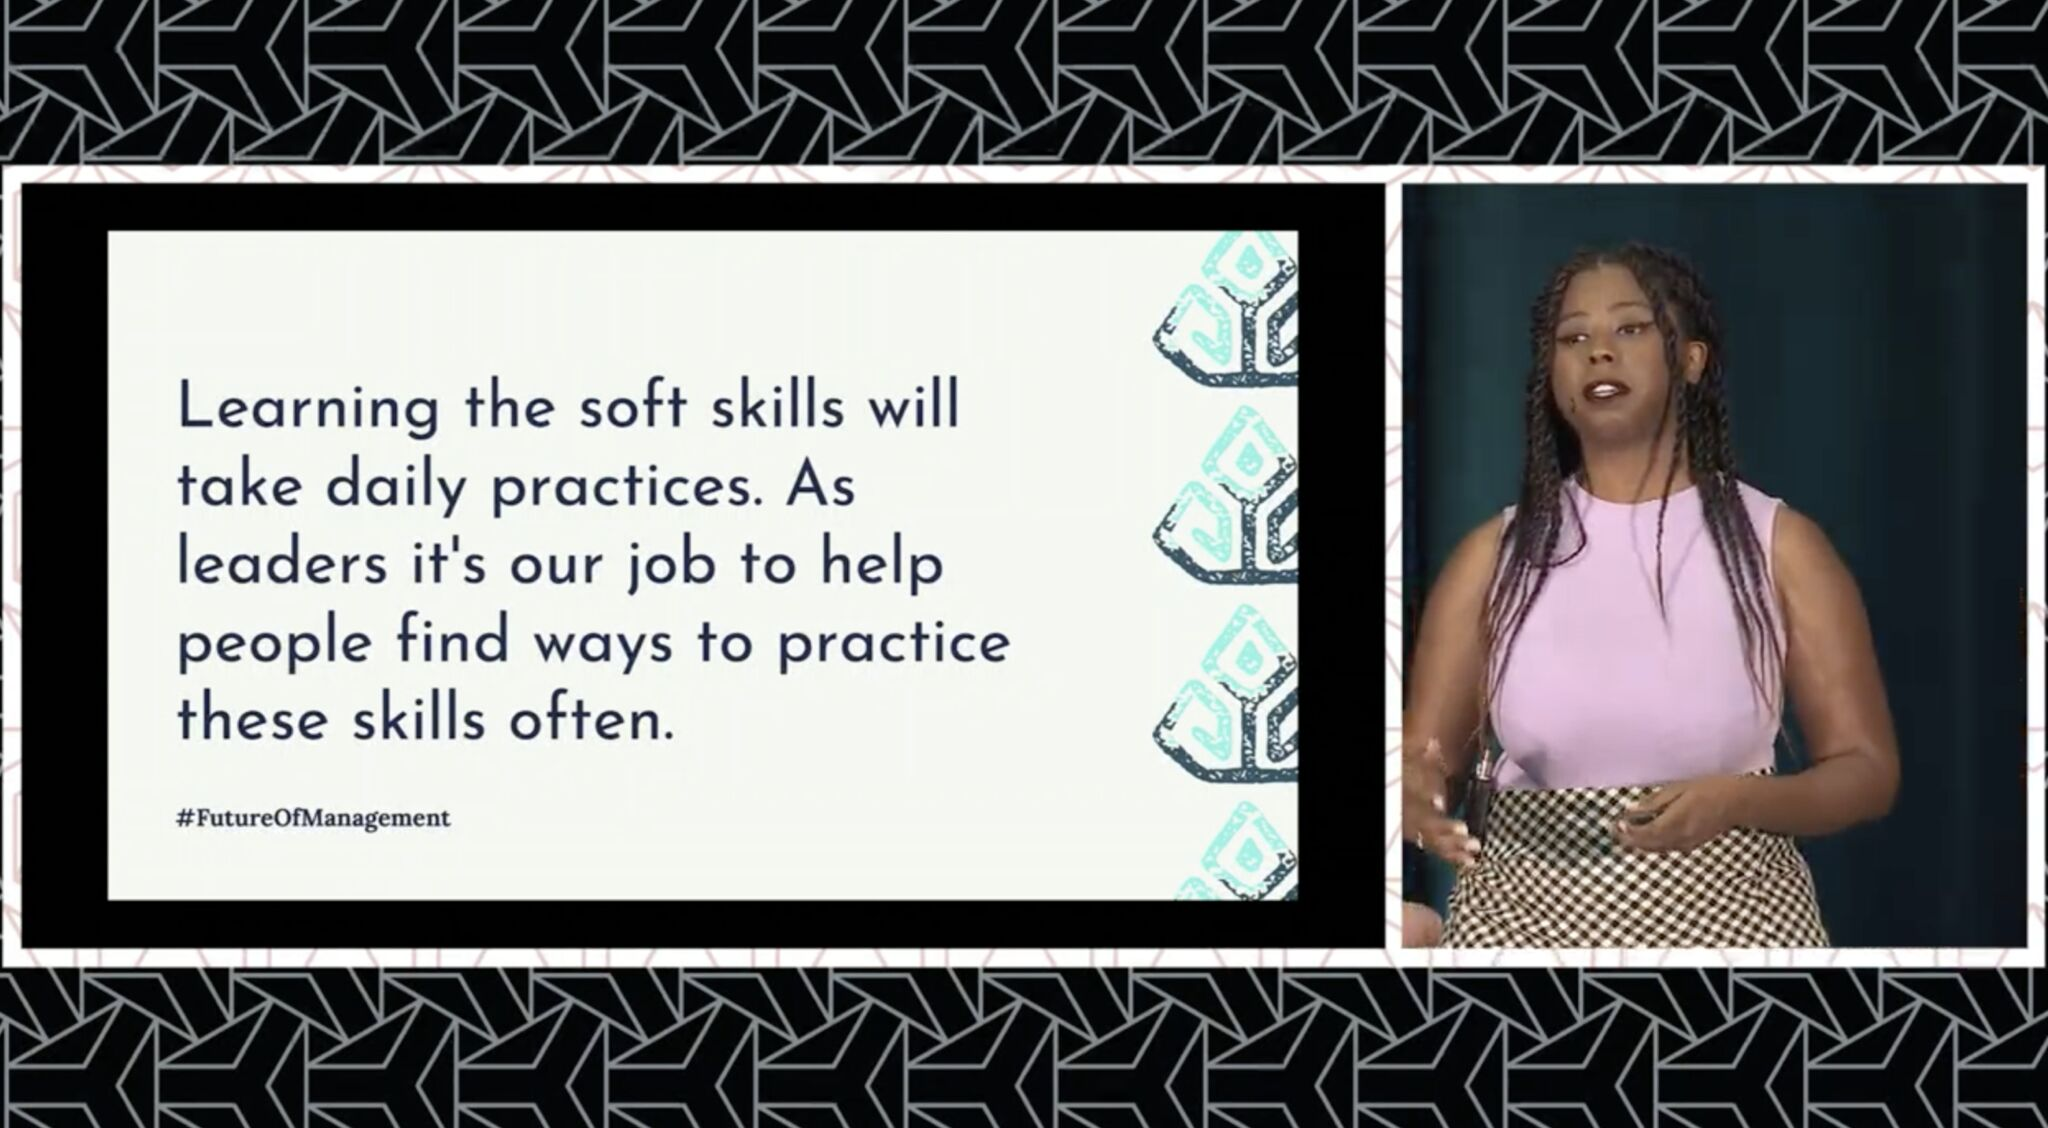 Valerie Phoenix - Learning the soft skills will take daily practices. As leaders it's our job to help people find ways to practice these skills often.